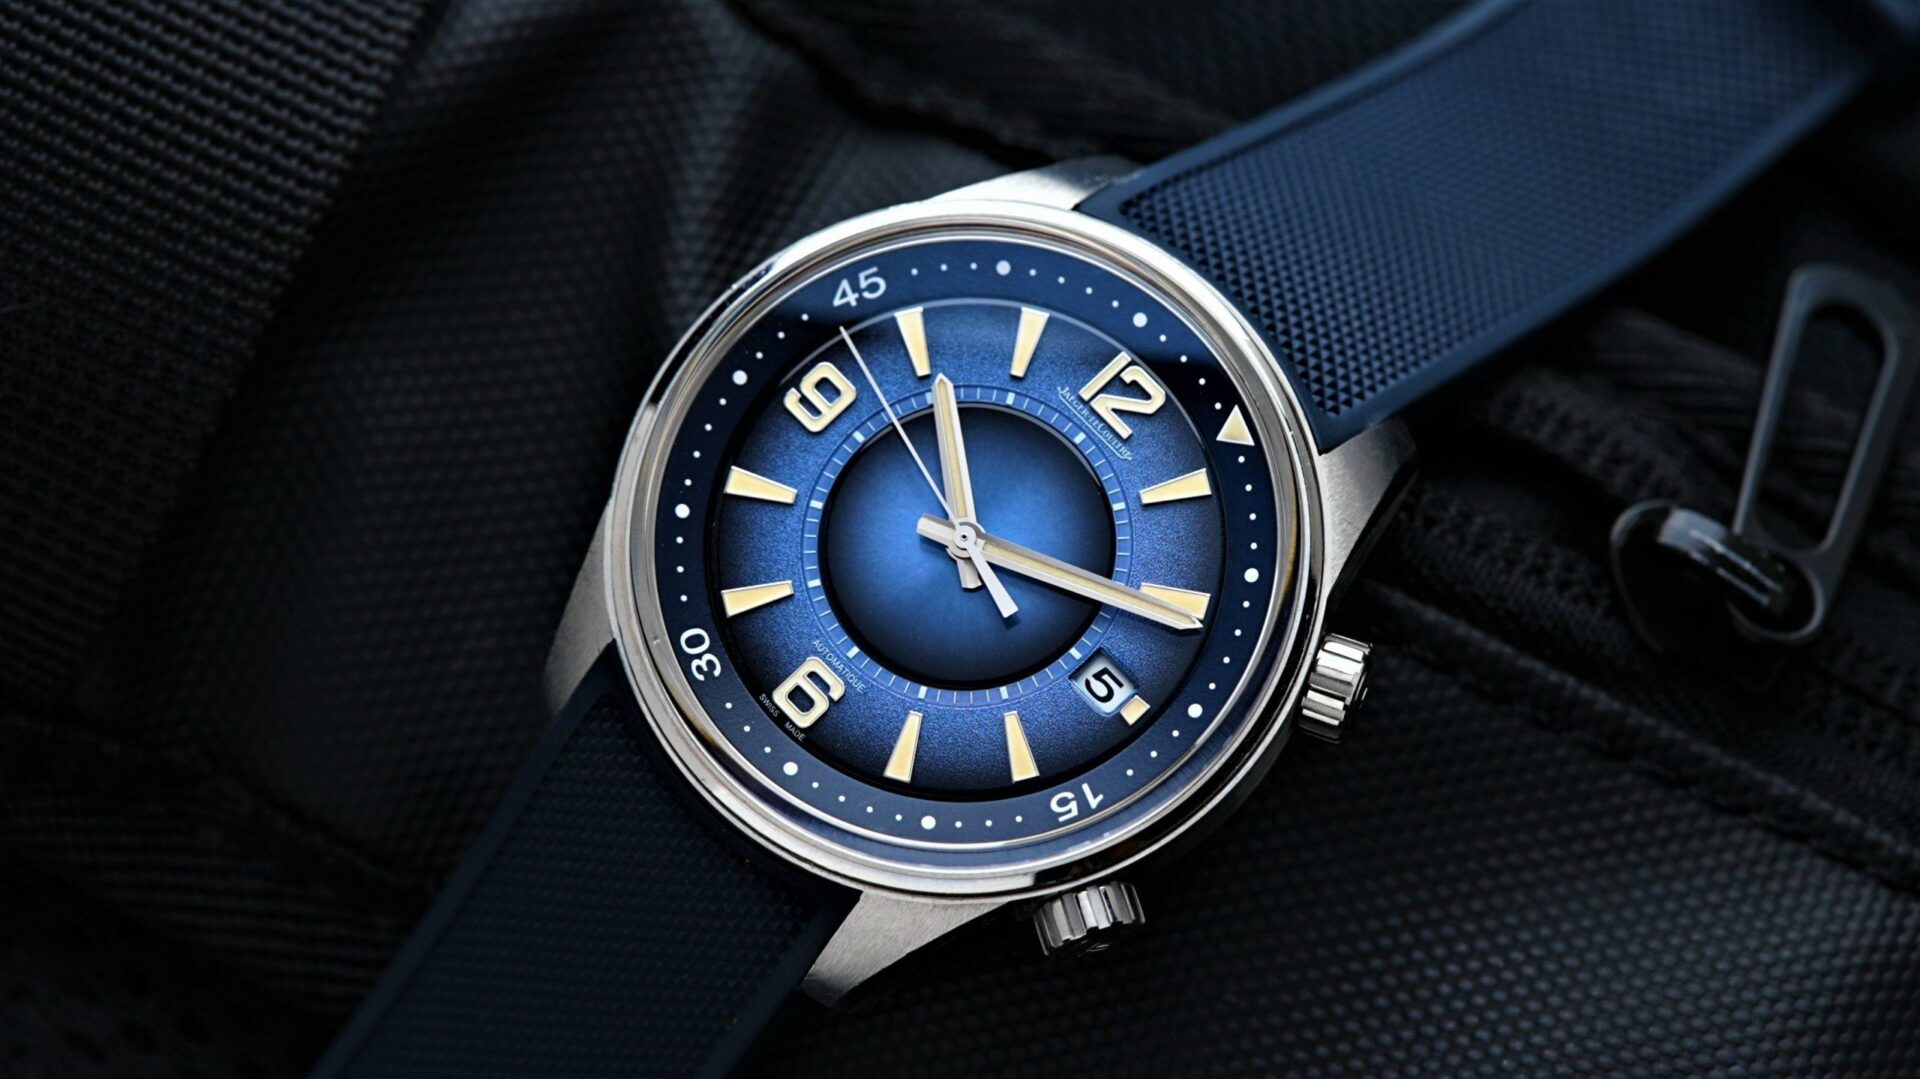 Jaeger-LeCoultre Polaris Limited Stunning Blue Dial watch pictured on an angle.